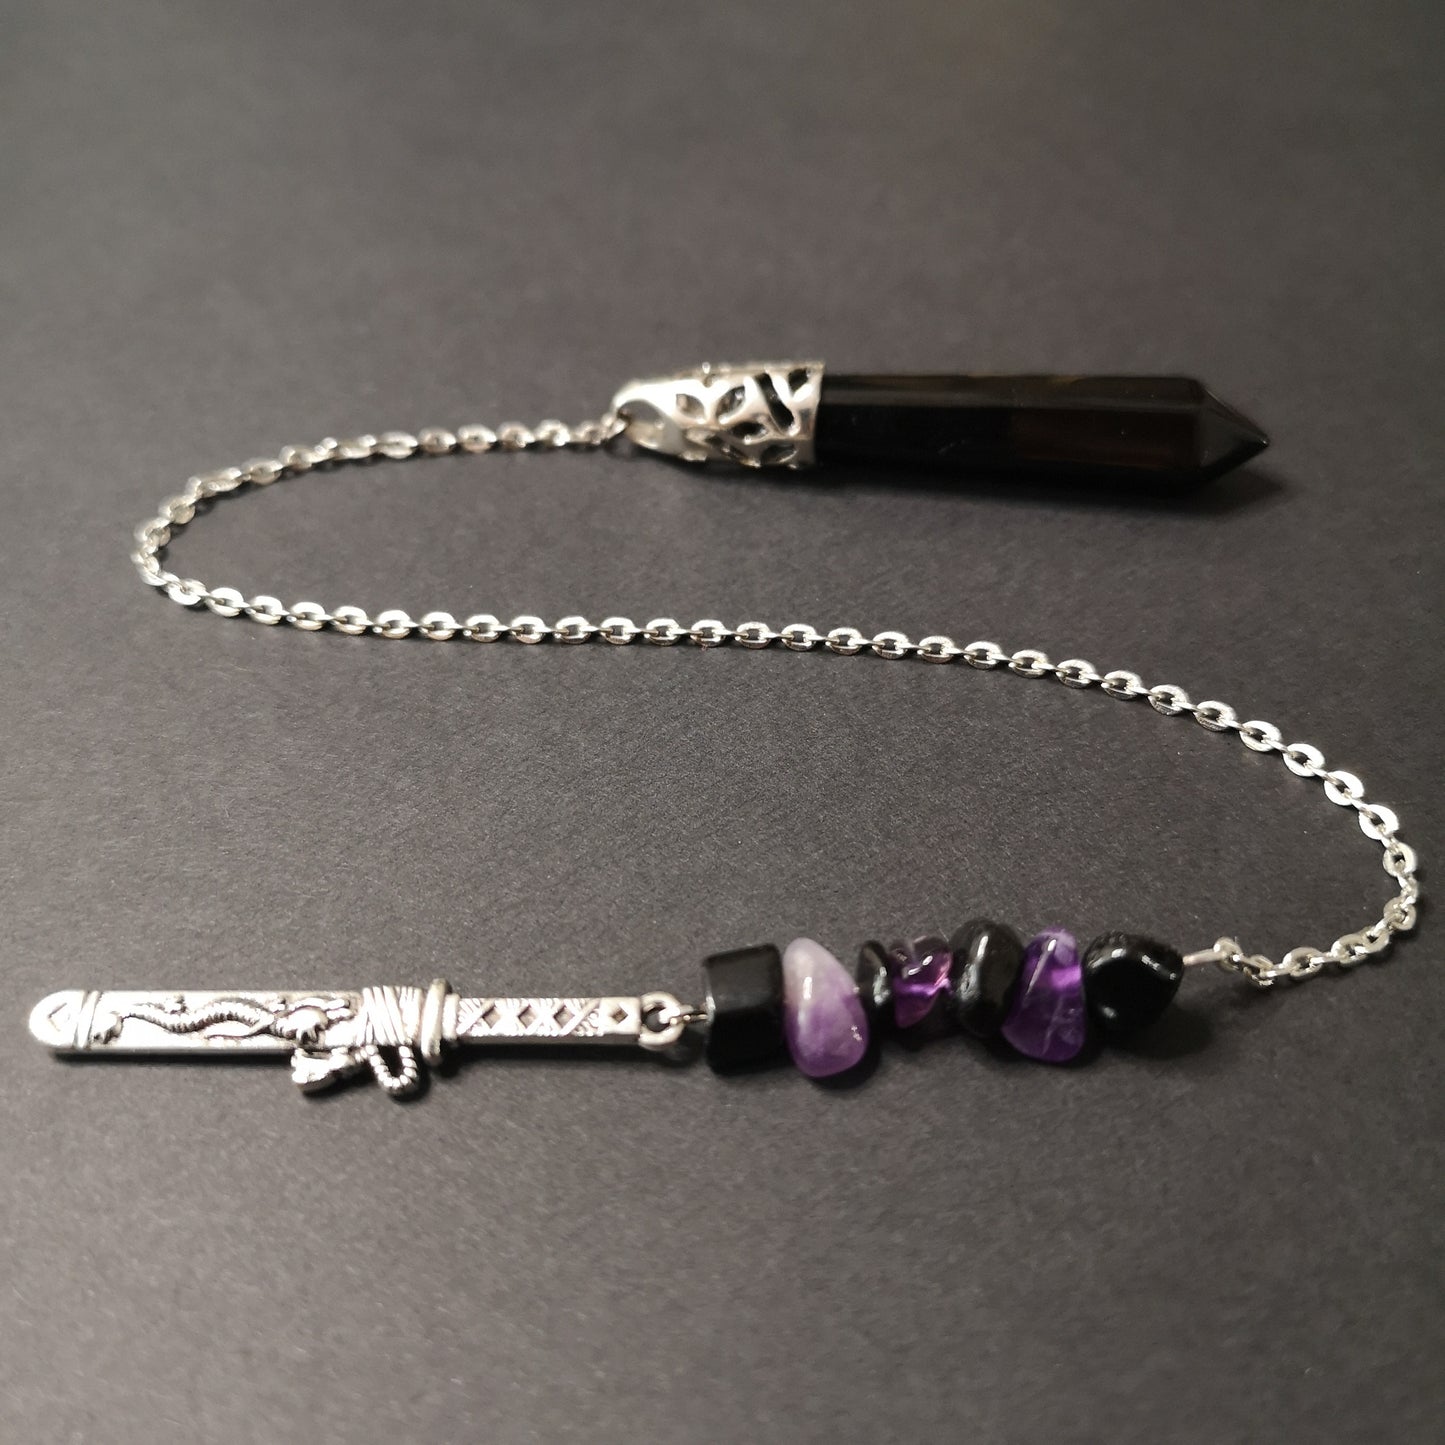 Onyx, obsidian and amethyst pendulum with a tanto dagger charm Baguette Magick